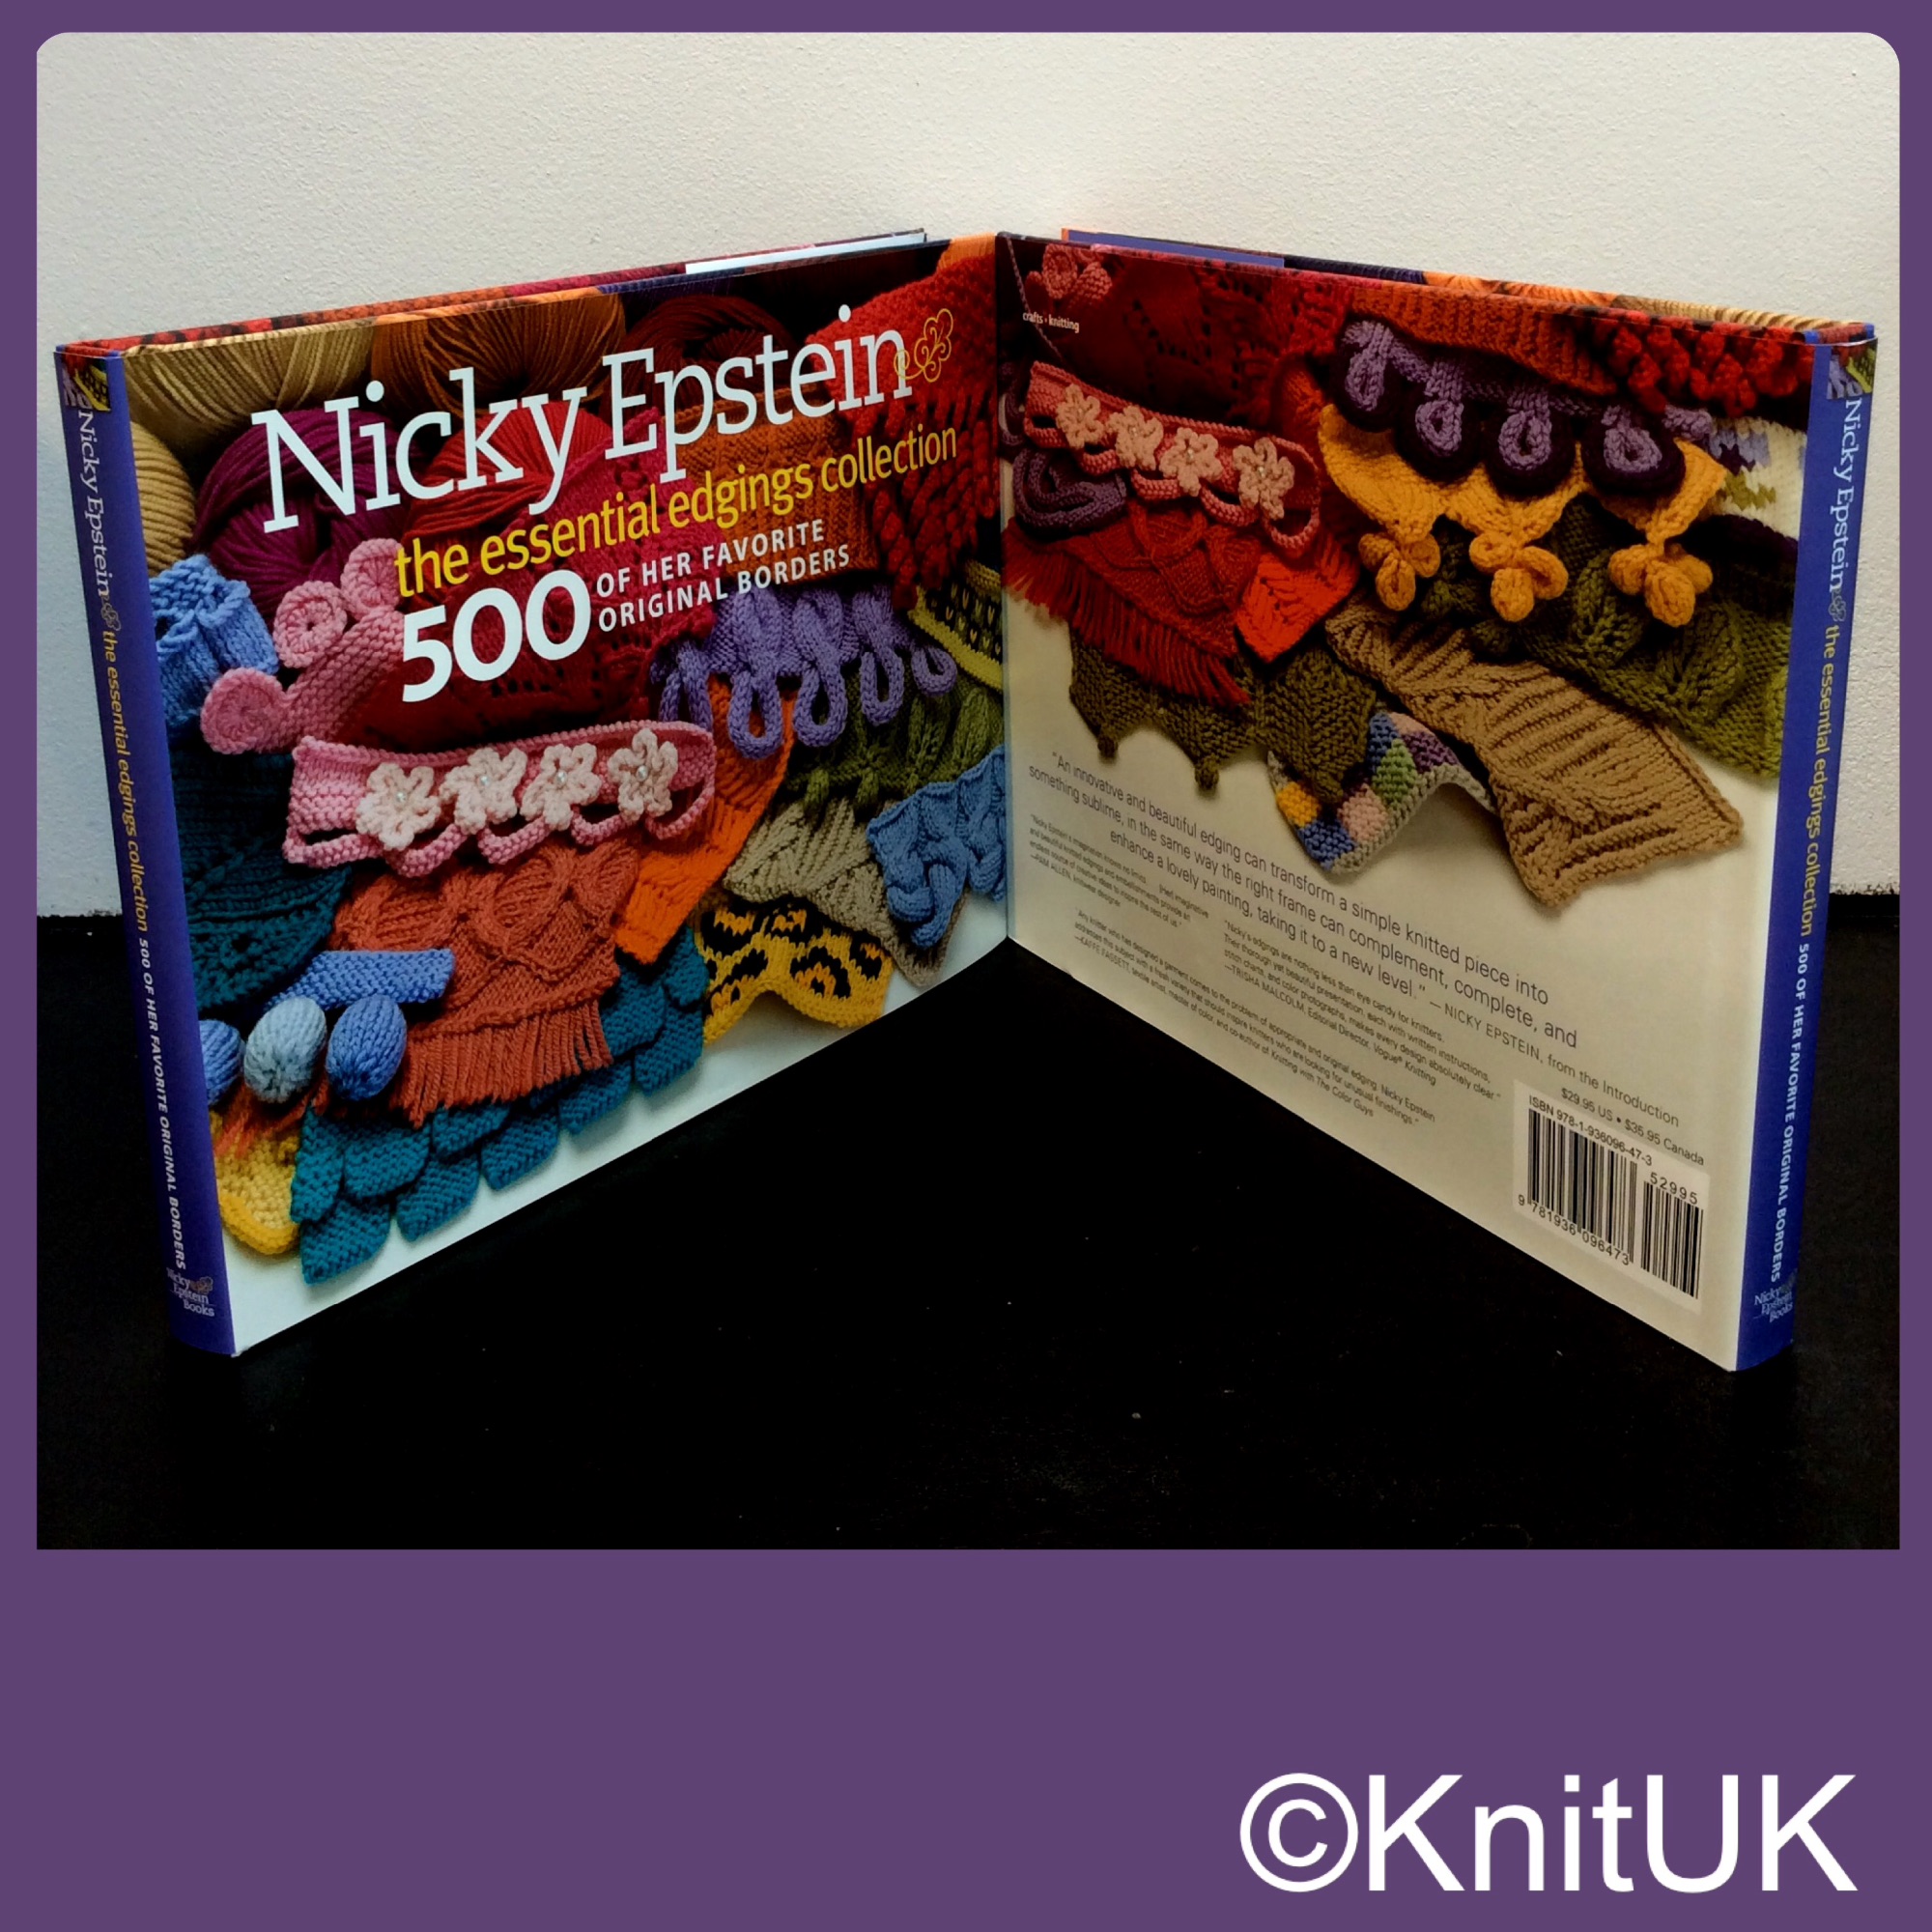 Sixth spring books nicky epstein the essential edgings collection 500 borde